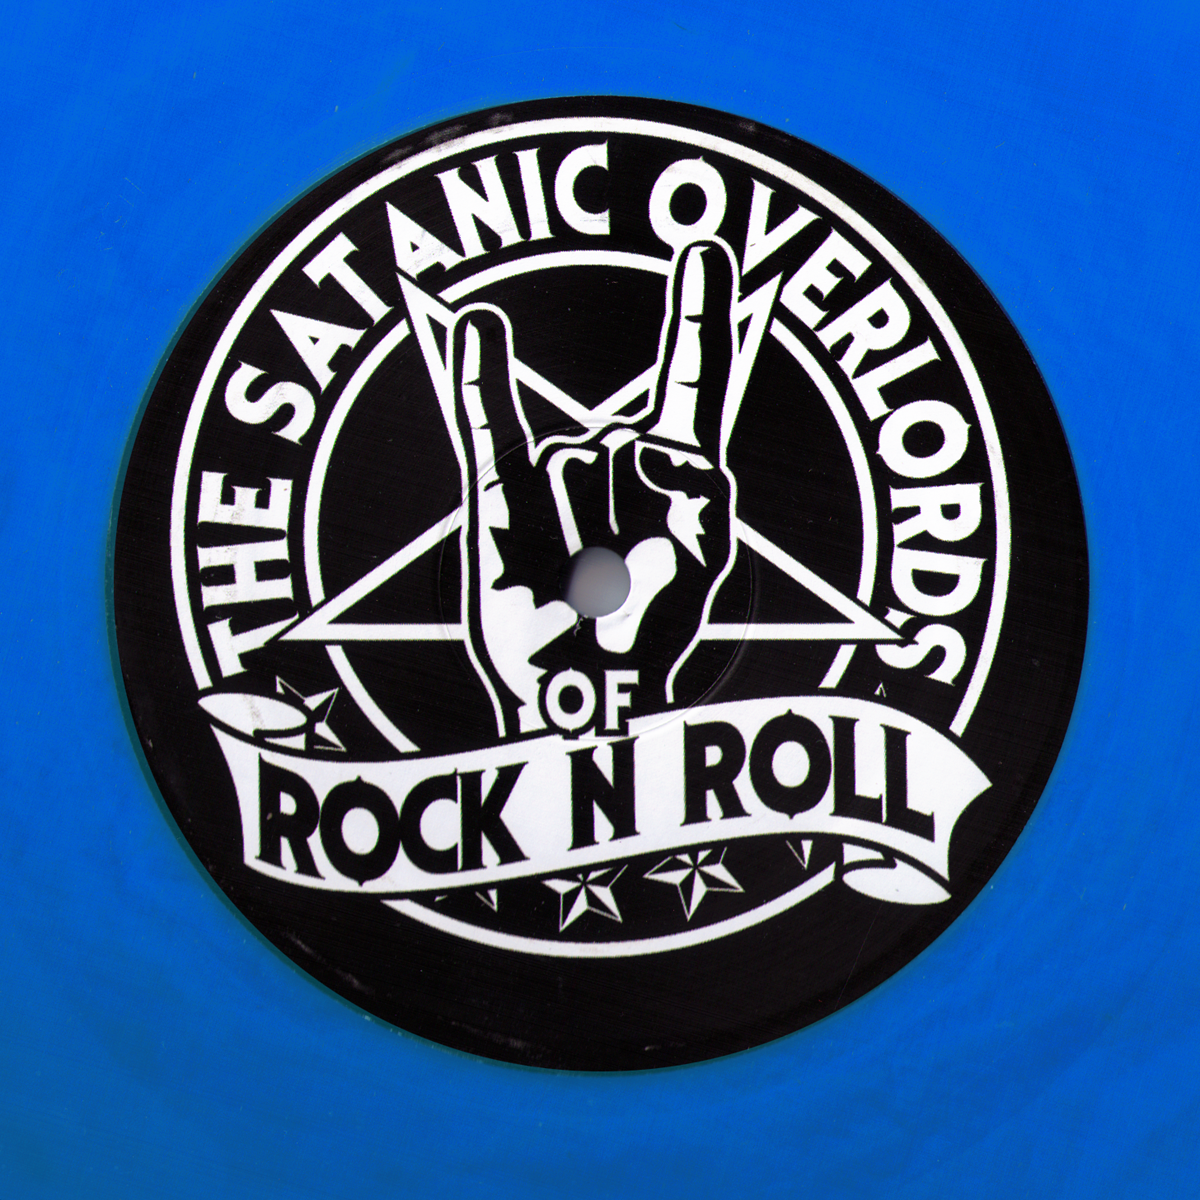 Satanic Overlords Of Rock ‘n’ Roll- S/T LP ~HELLACOPTERS / RARE BLUE WAX LTD TO 101!